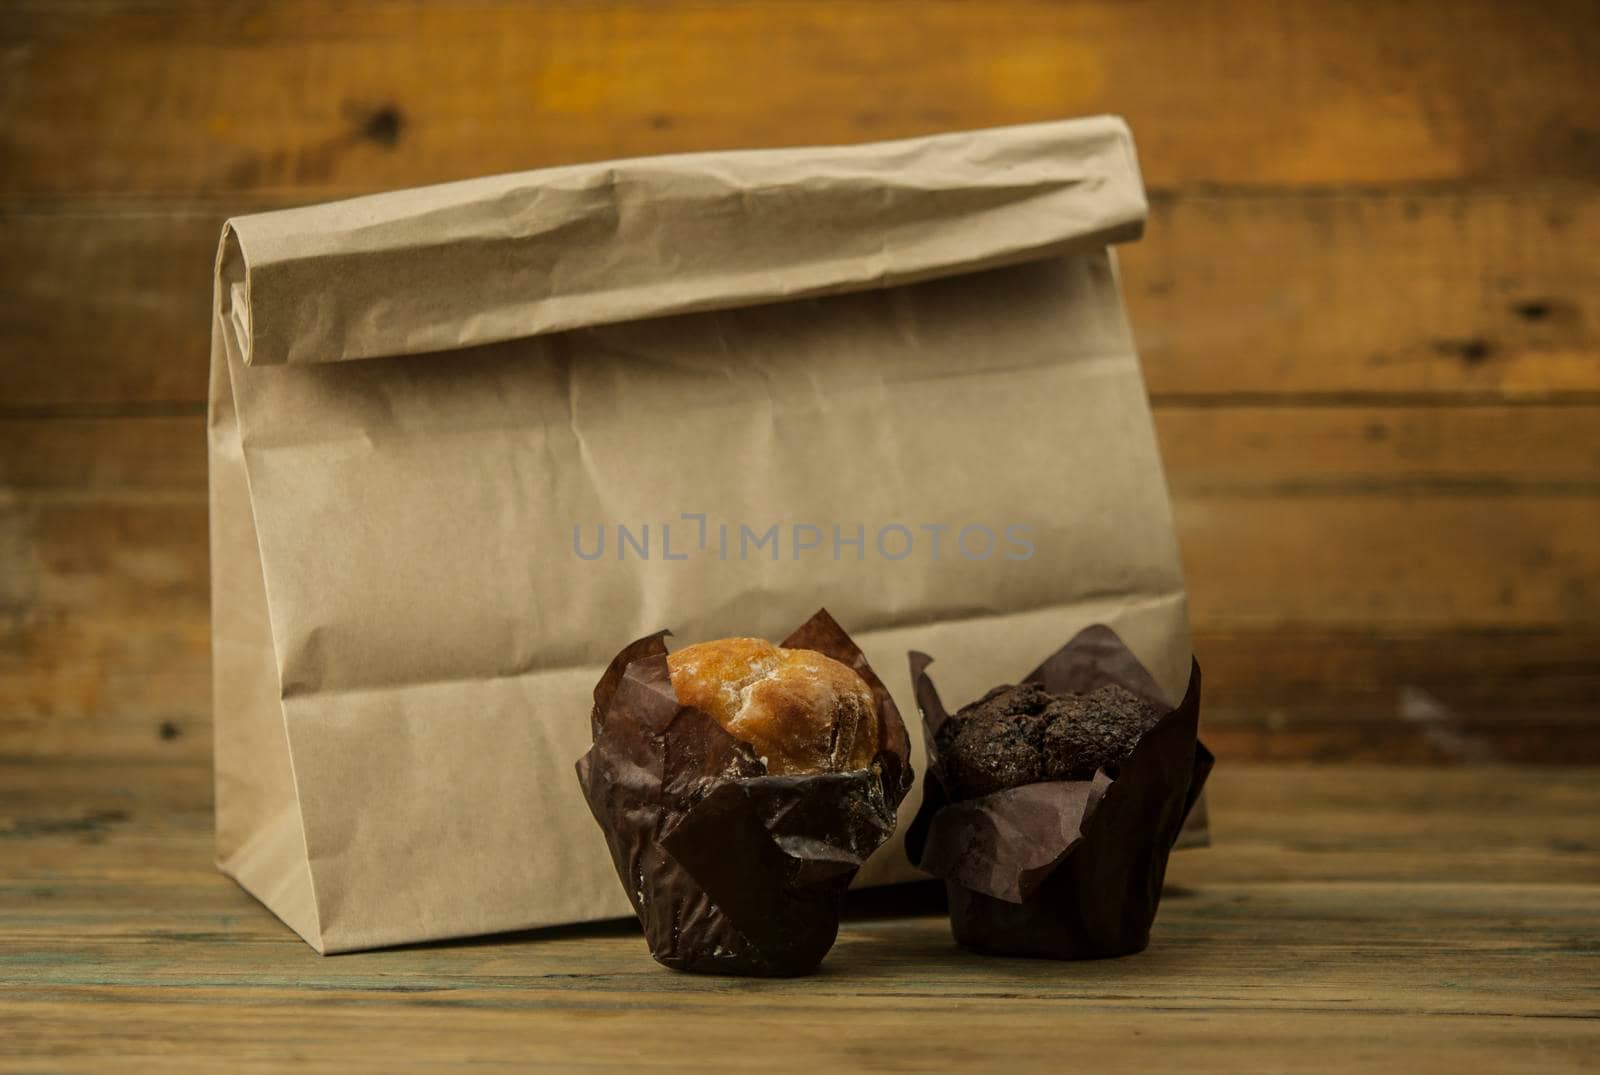 Homemade chocolate and vanilla cupcakes with paper lunch bag on a wooden table, sprinkled with powdered sugar.